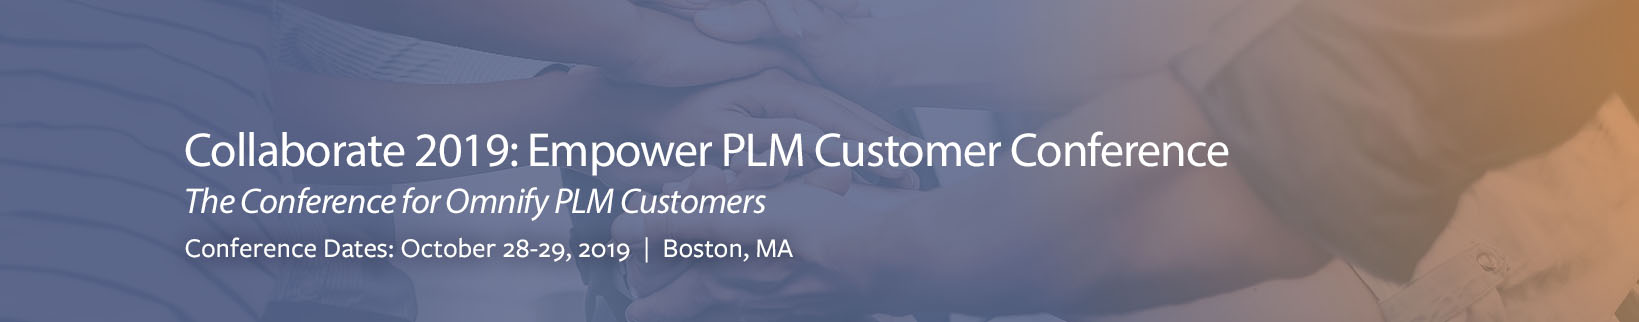 Collaborate 2019: Empower PLM Customer Conference